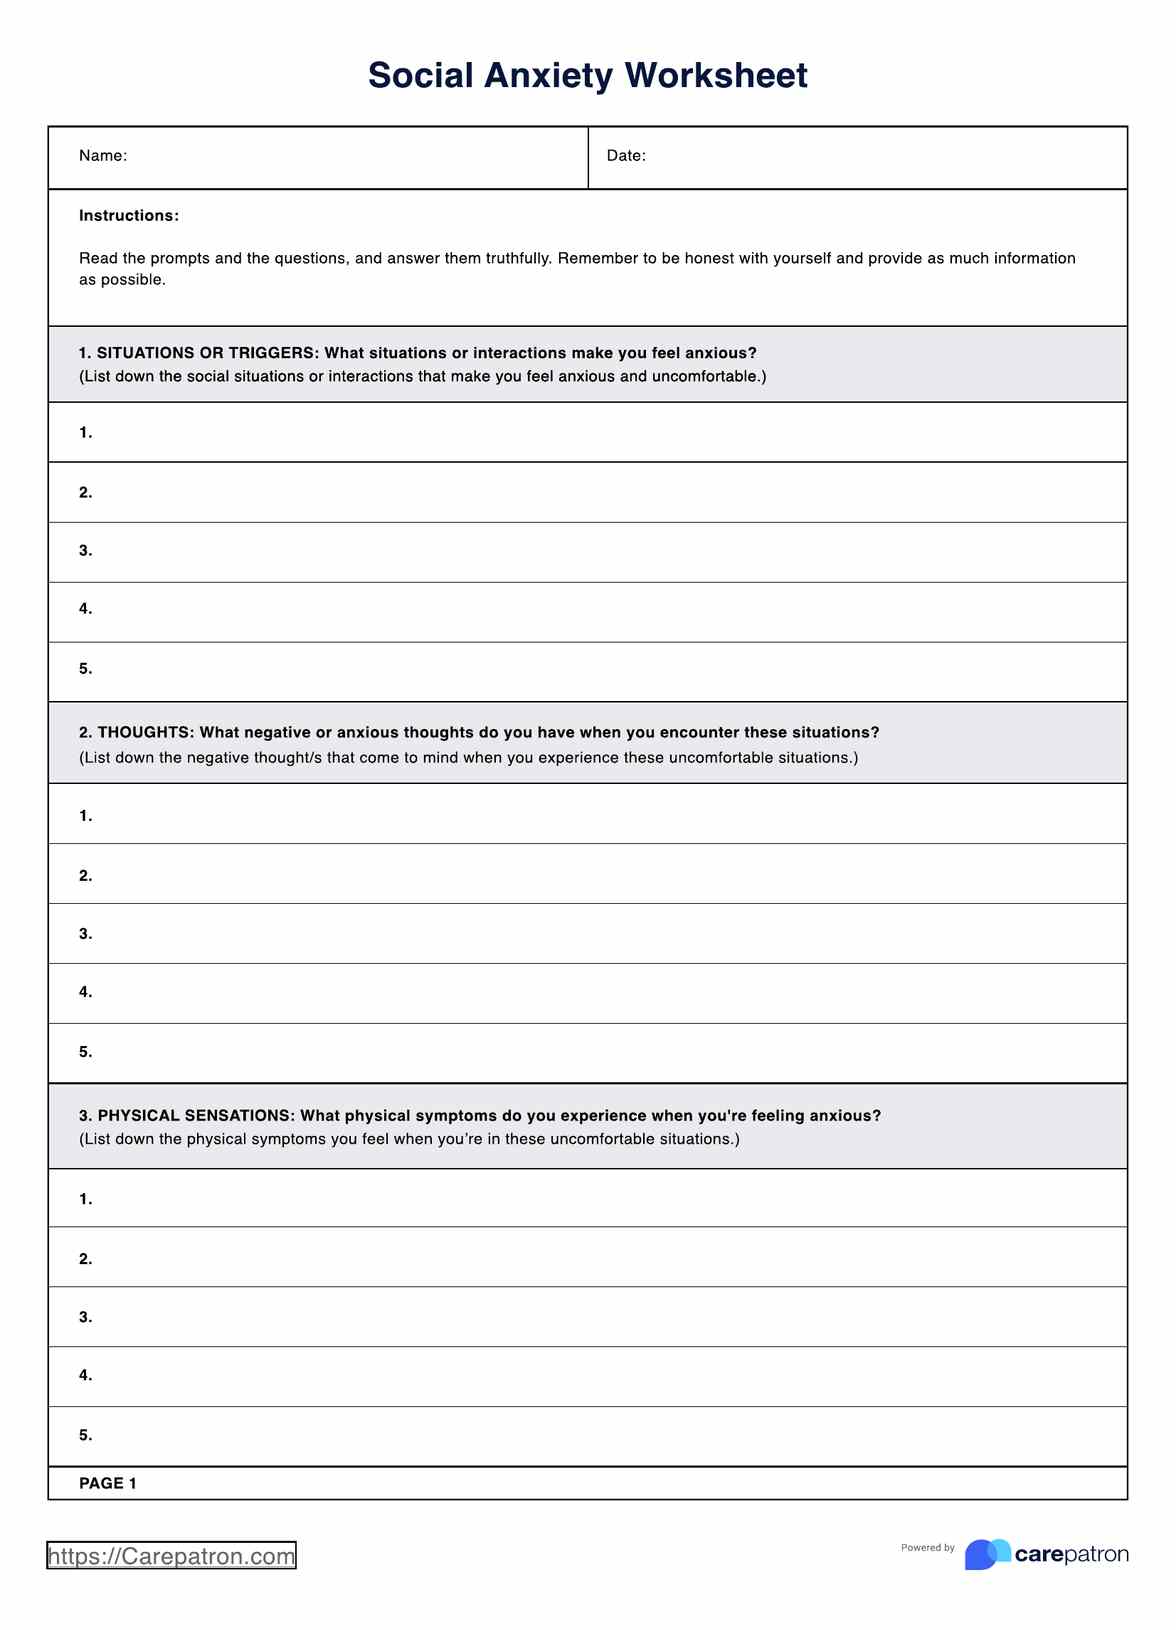 Social Anxiety Test PDF Example